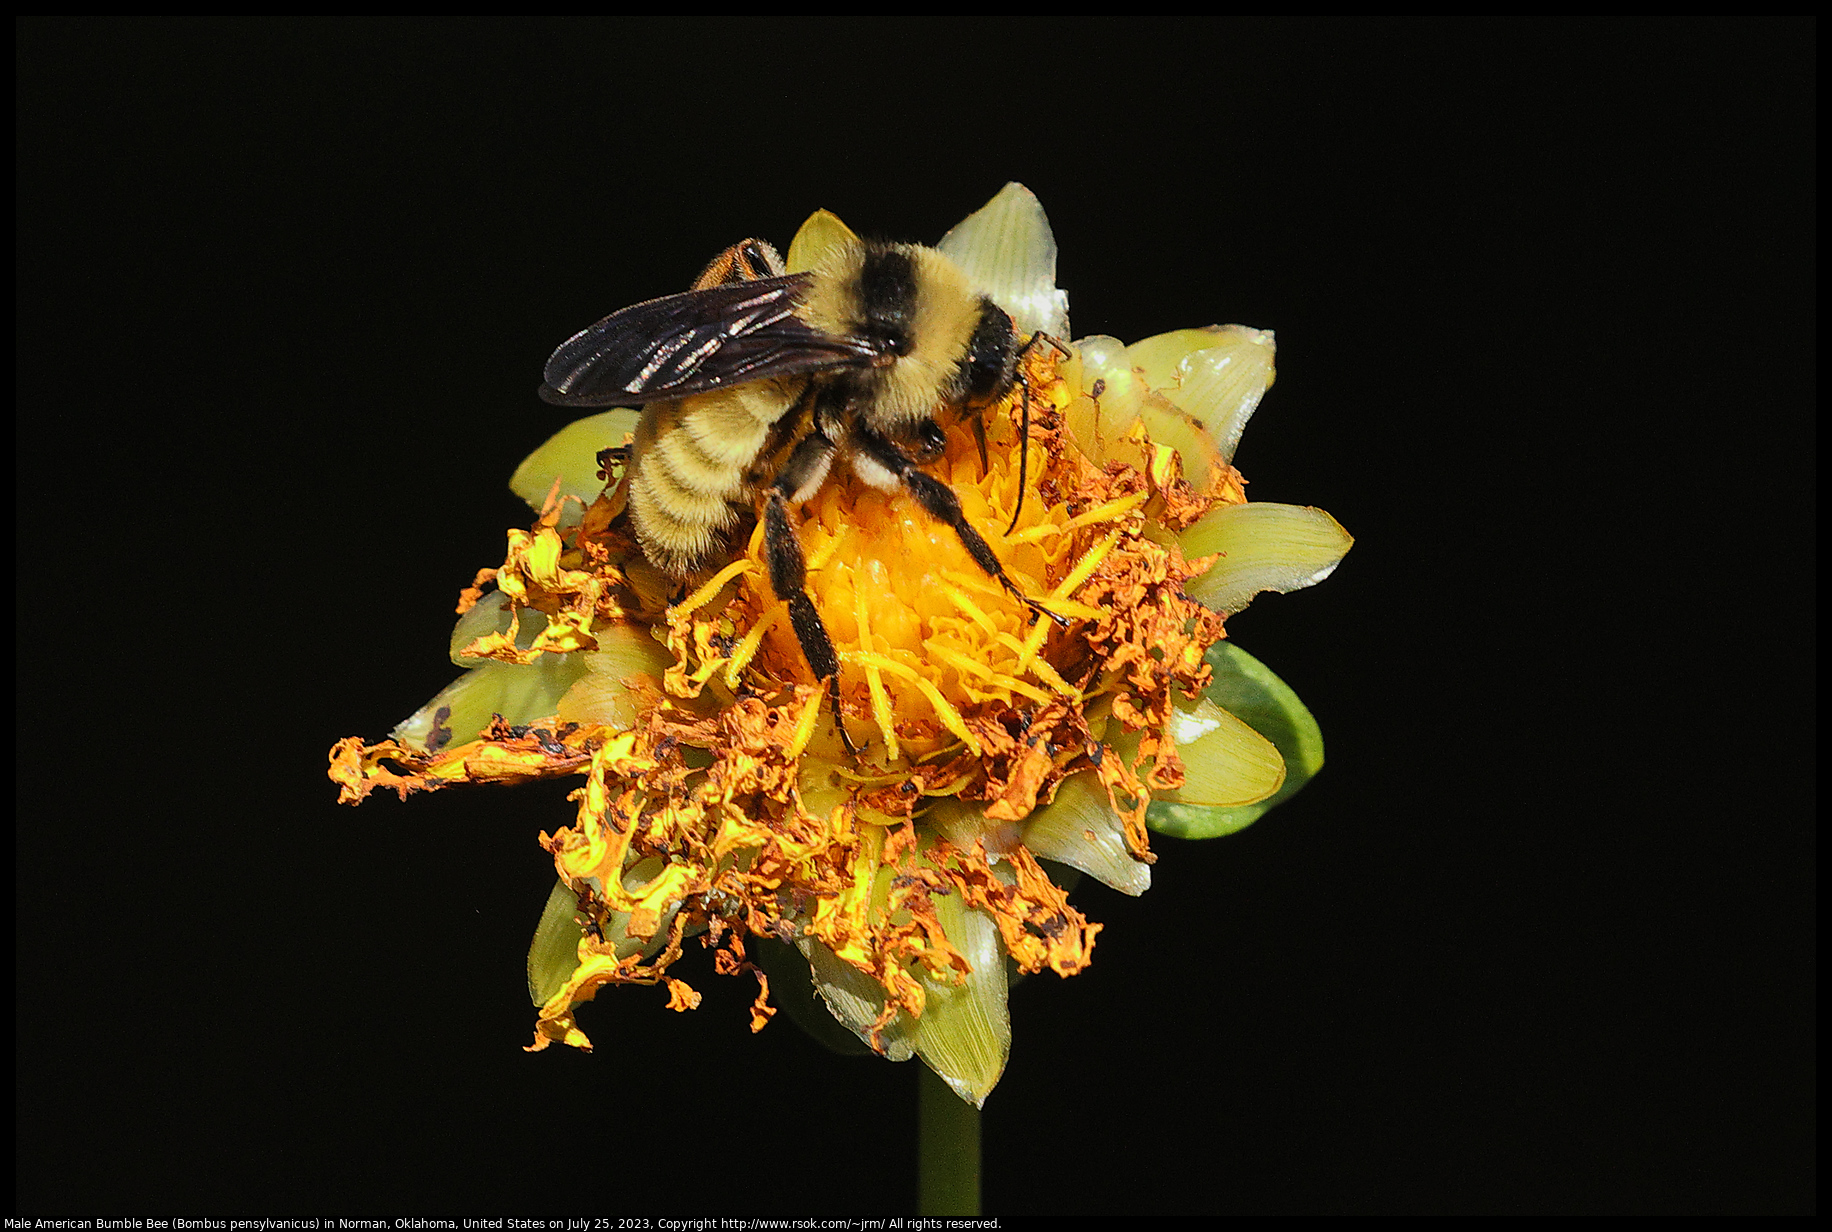 Male American Bumble Bee (Bombus pensylvanicus) in Norman, Oklahoma, United States on July 25, 2023